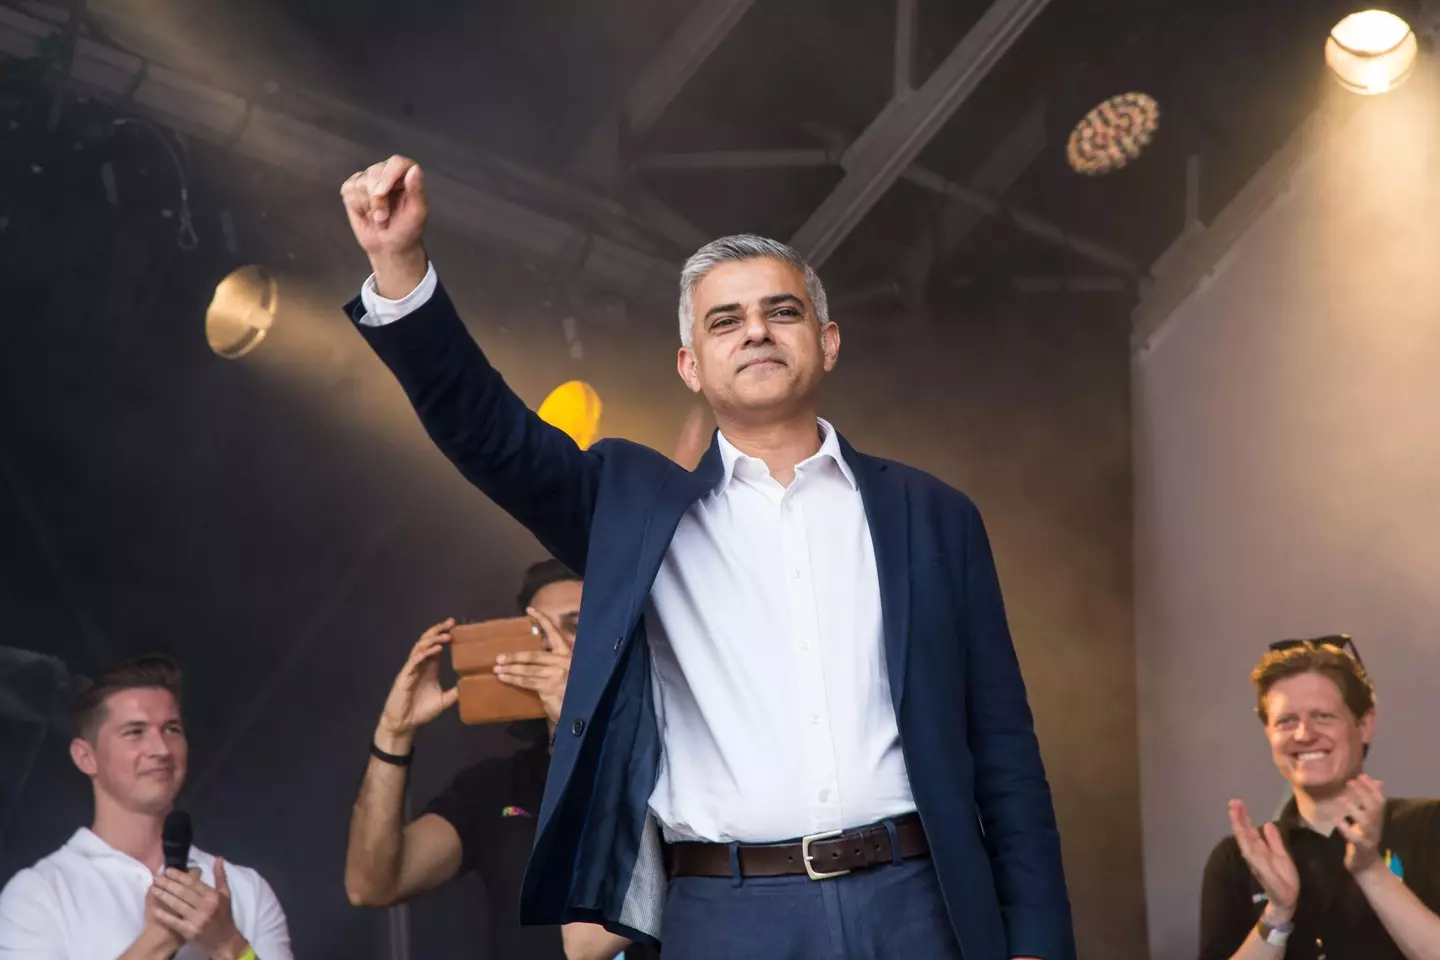 Mayor of London Sadiq Khan waves to the crowd in Trafalgar Square after the Pride London parade, in London, 2016.